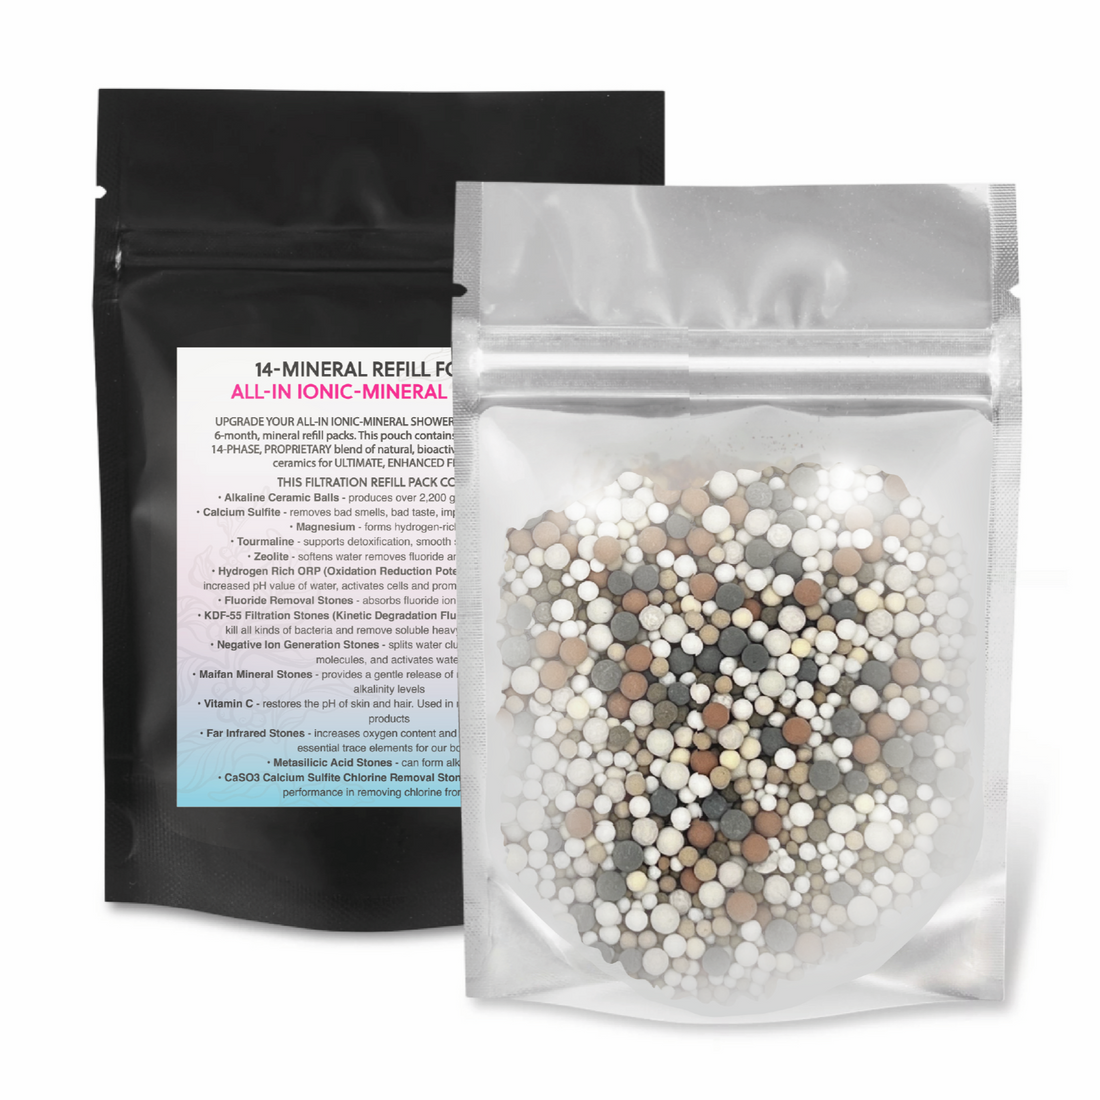 14-Mineral Filtration Refill Pack